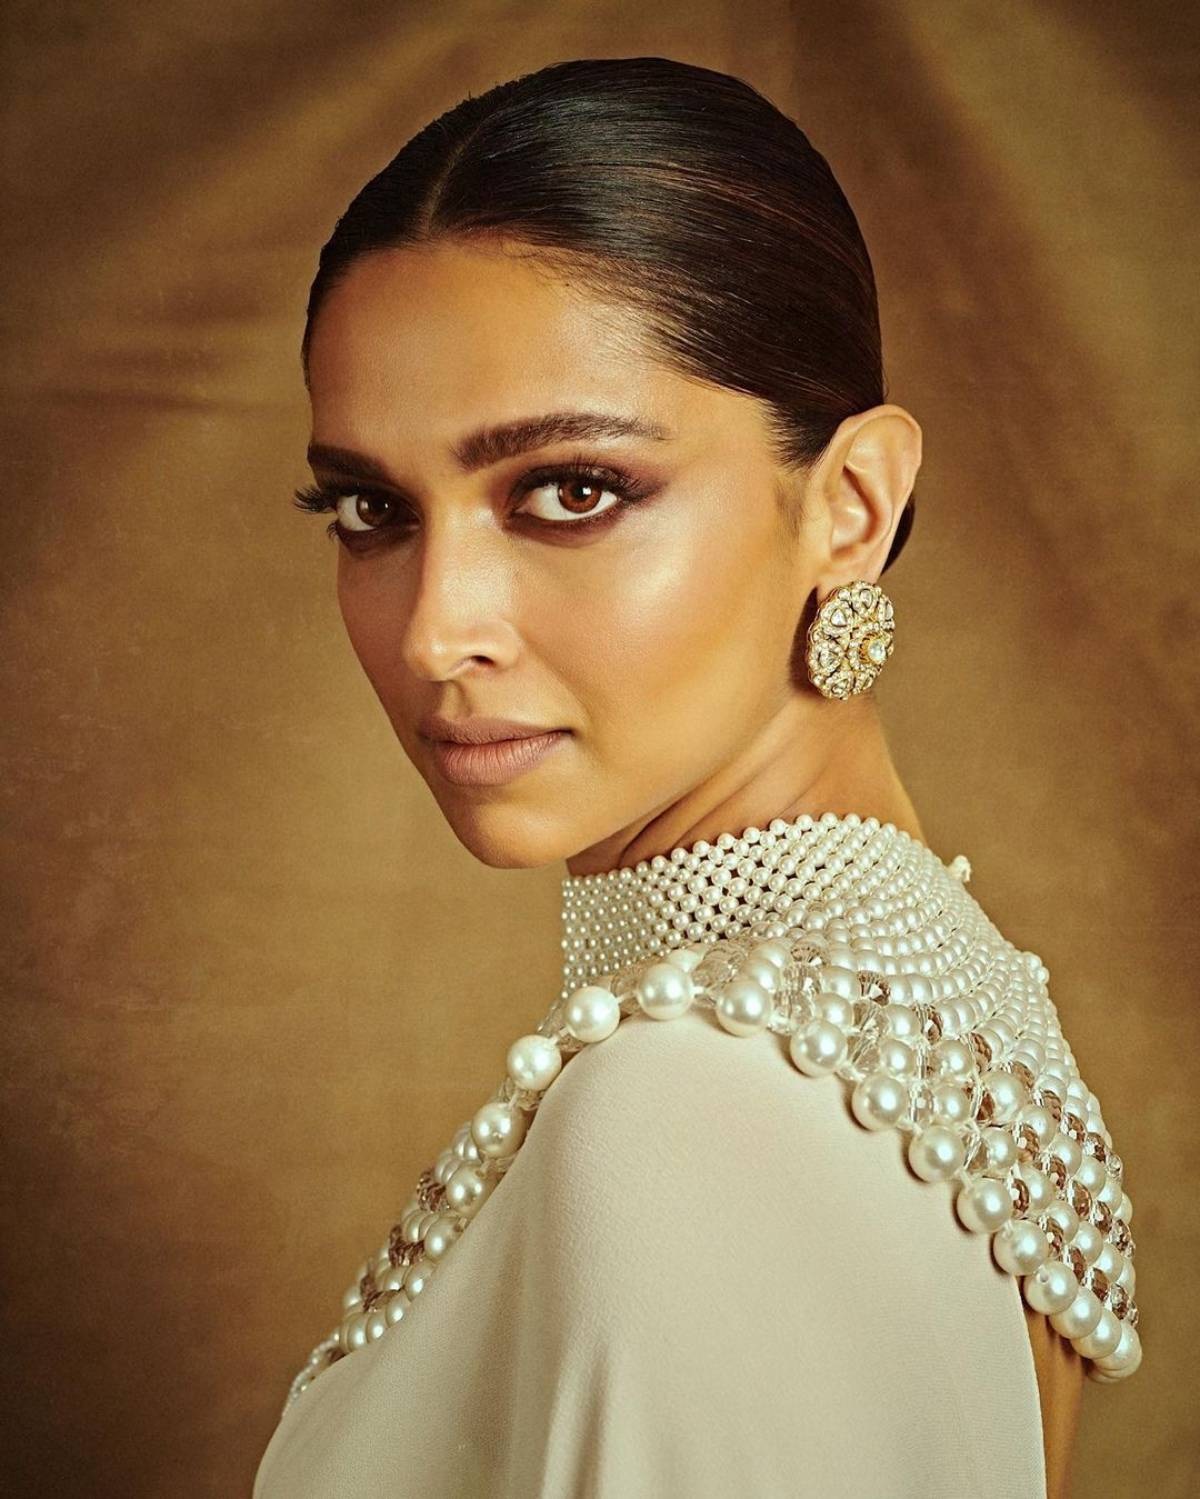 Deepika In Cannes 2022-Ruffle Sari-Pearl Accessory, Fans Going On And On Over About Deepika Padukone's Flawless Look-Pic Credit Instagram